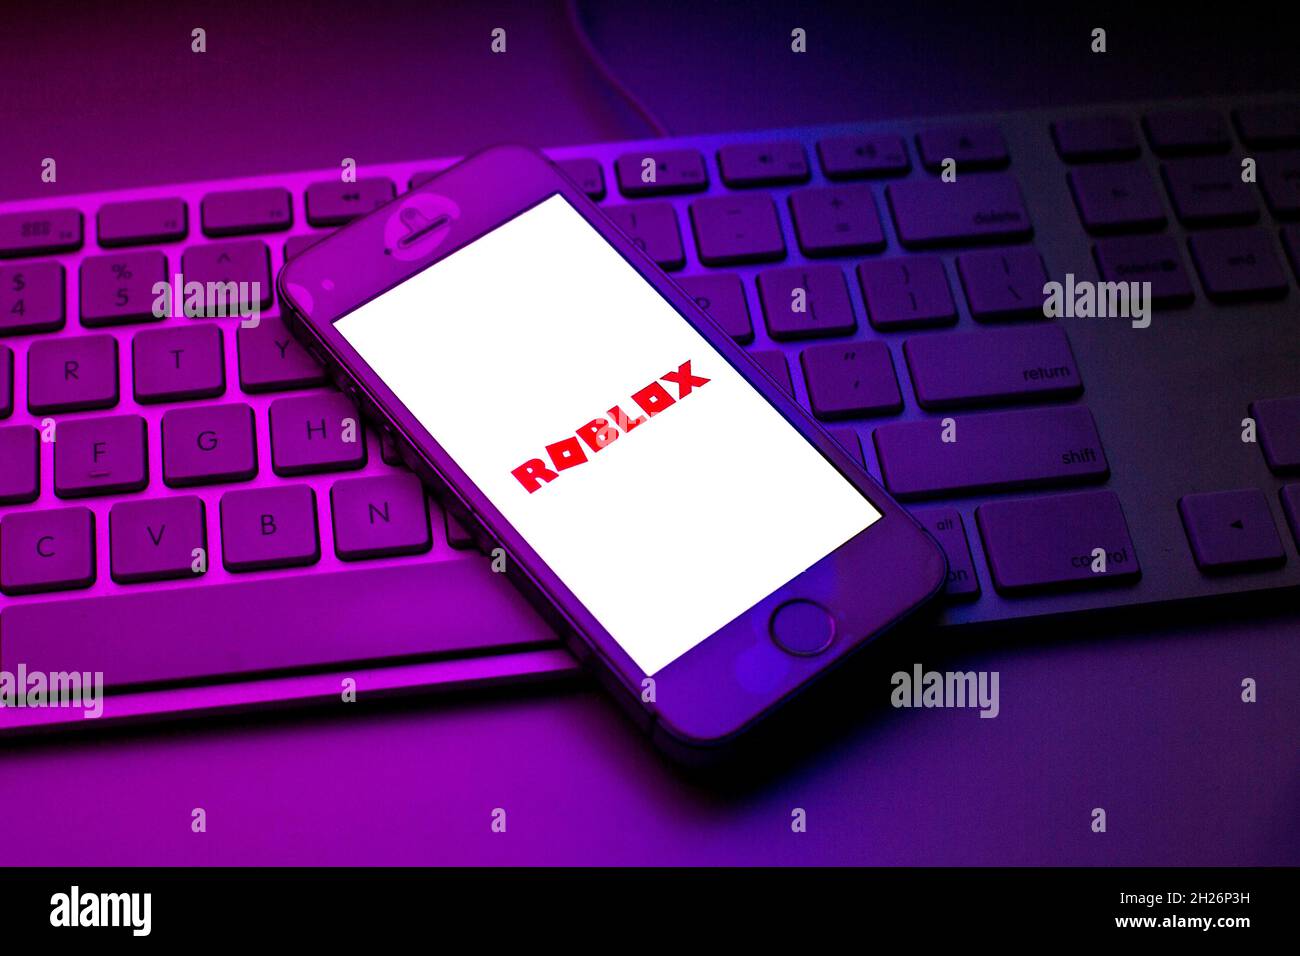 Roblox Game App On Smartphone Screen Stock Photo 1997154221